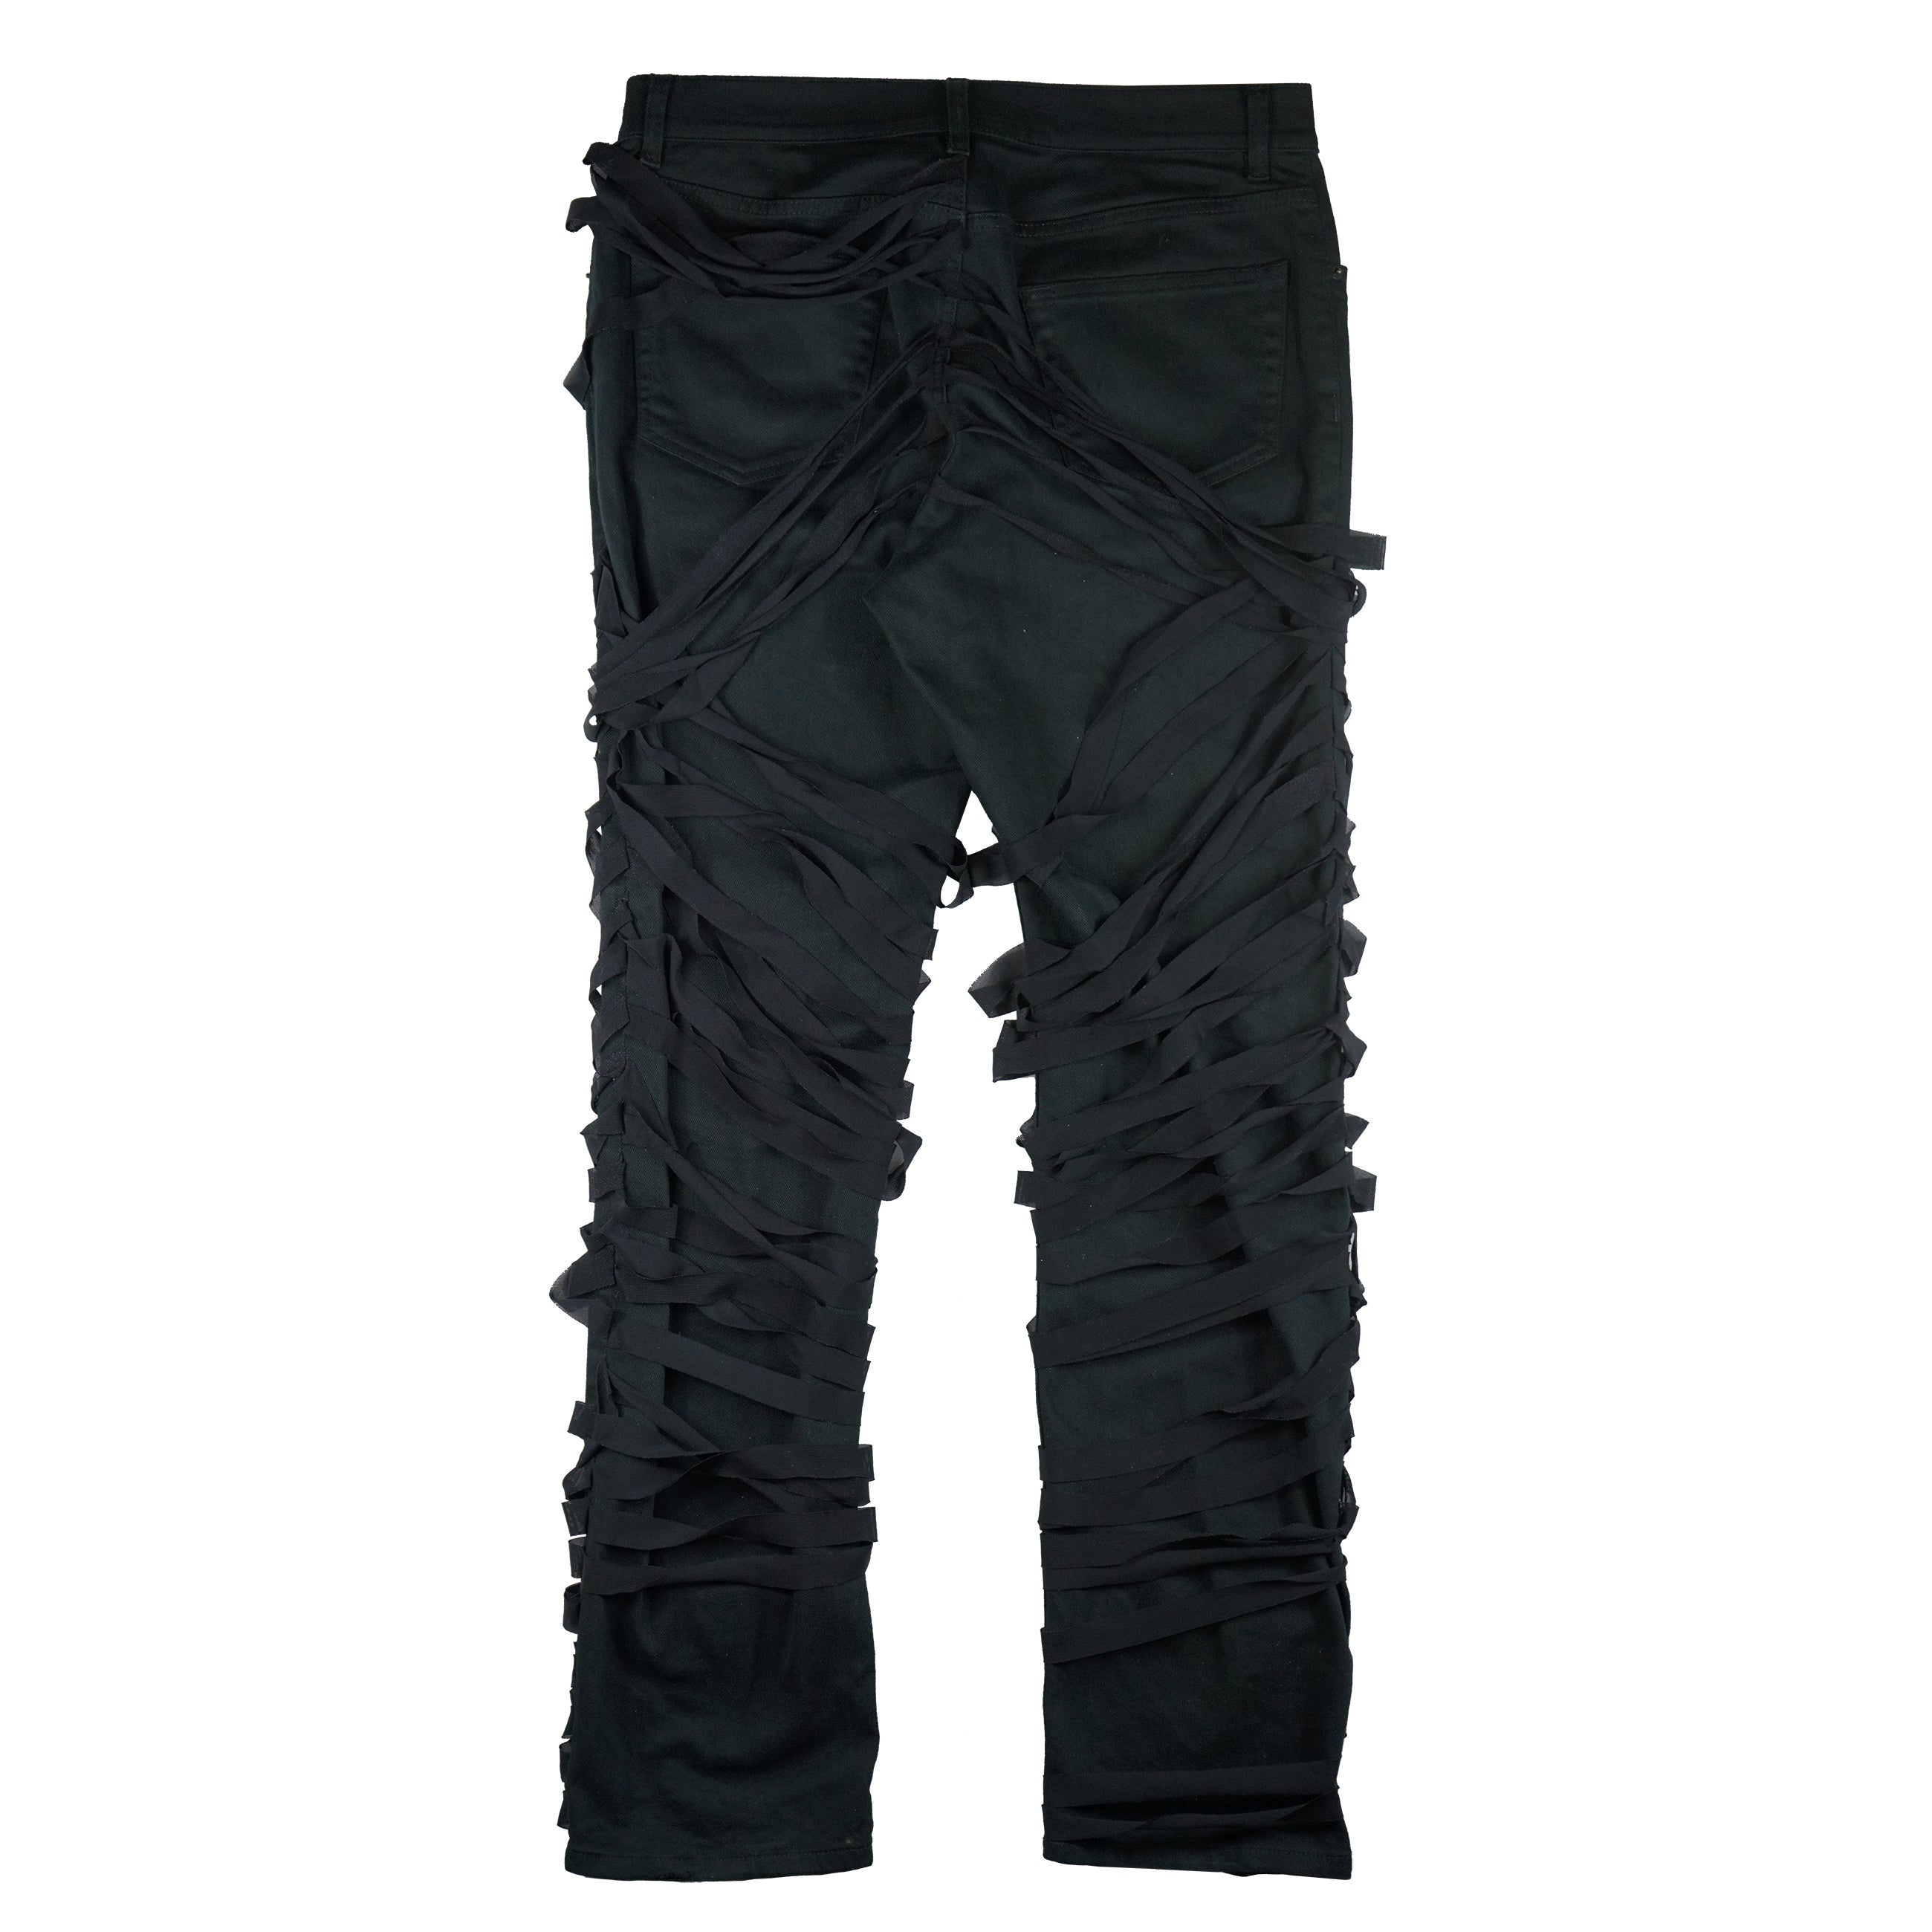 Rental Only: S/S 04 Mummy Pants – Hid.n